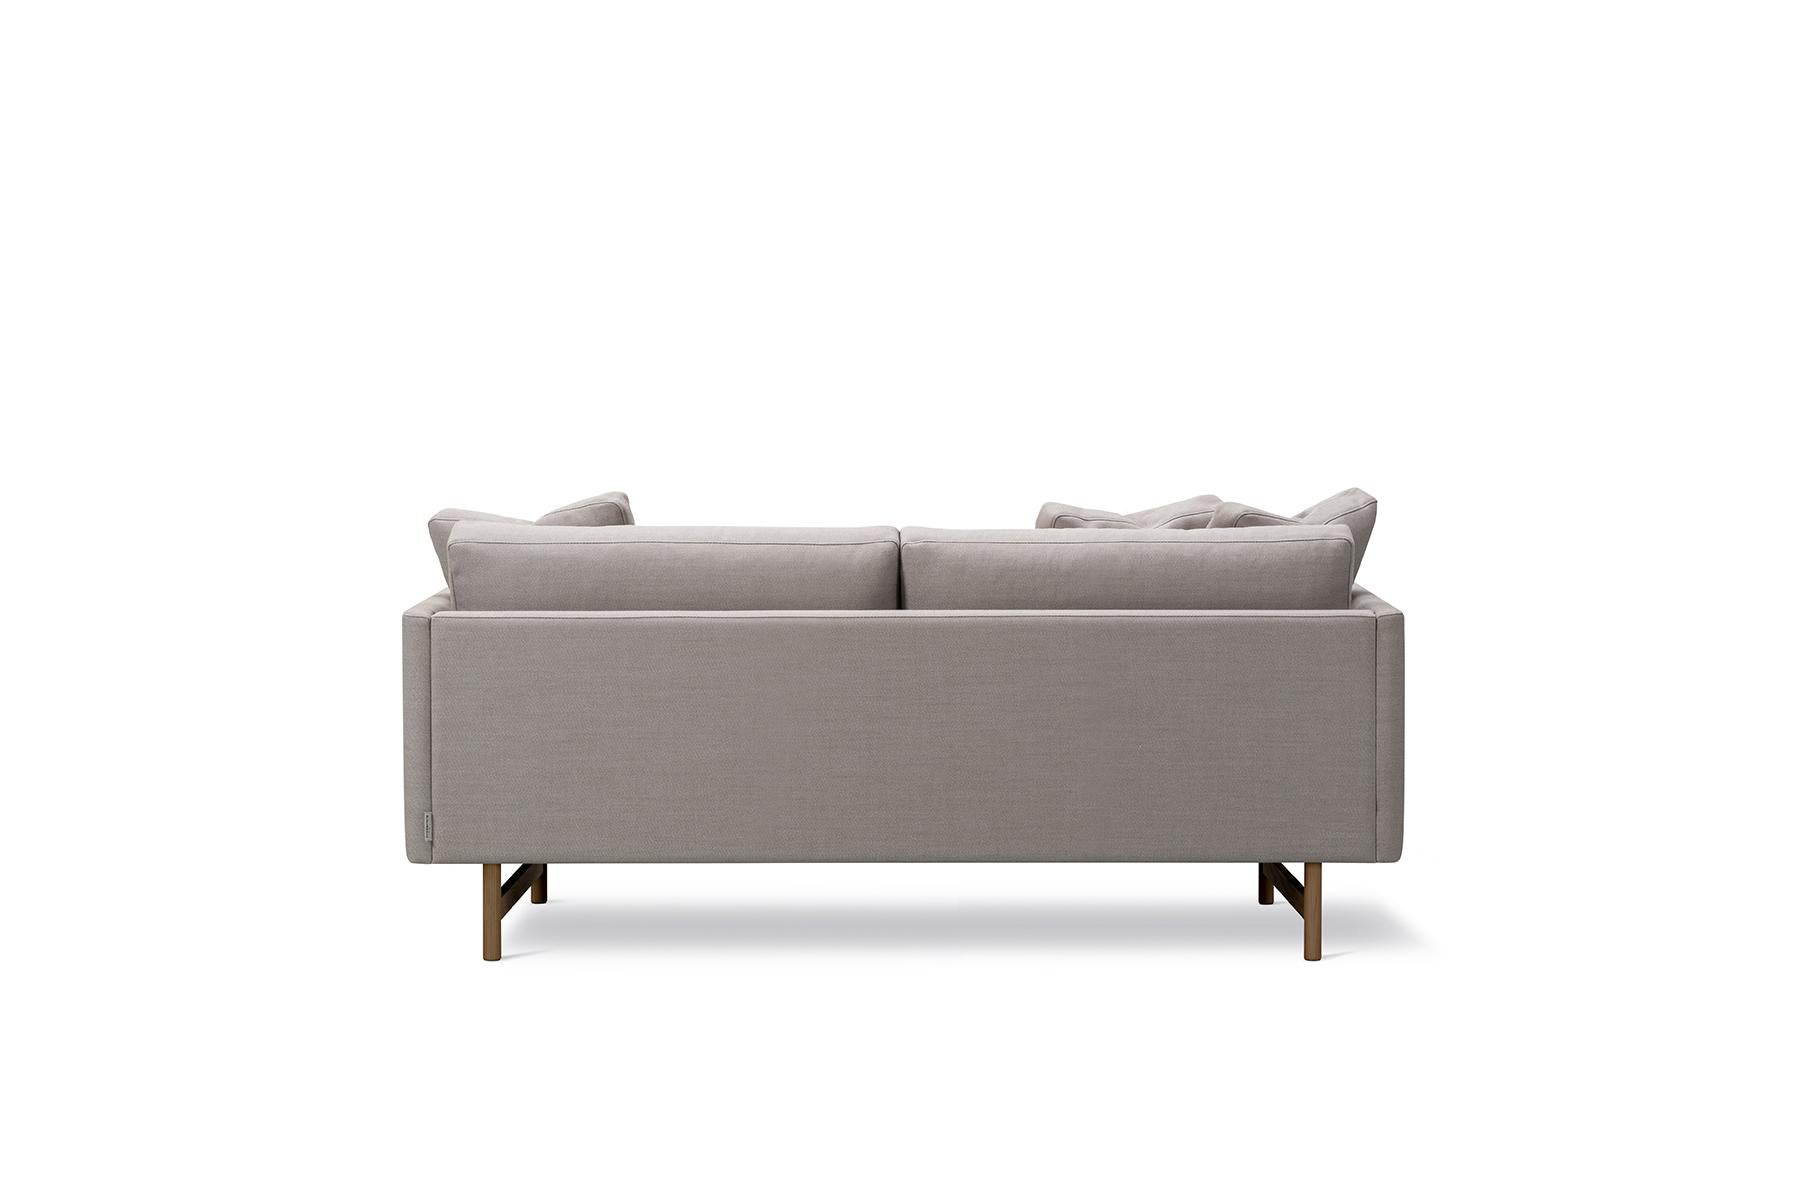 The Hugo Passos Calmo sofa 80 – 2-seater – Metal base sofa offers a roomy sense of cosiness, where straight lines converge with discrete curved details. Comfy cushions complete the picture in this understated expression of elegance.